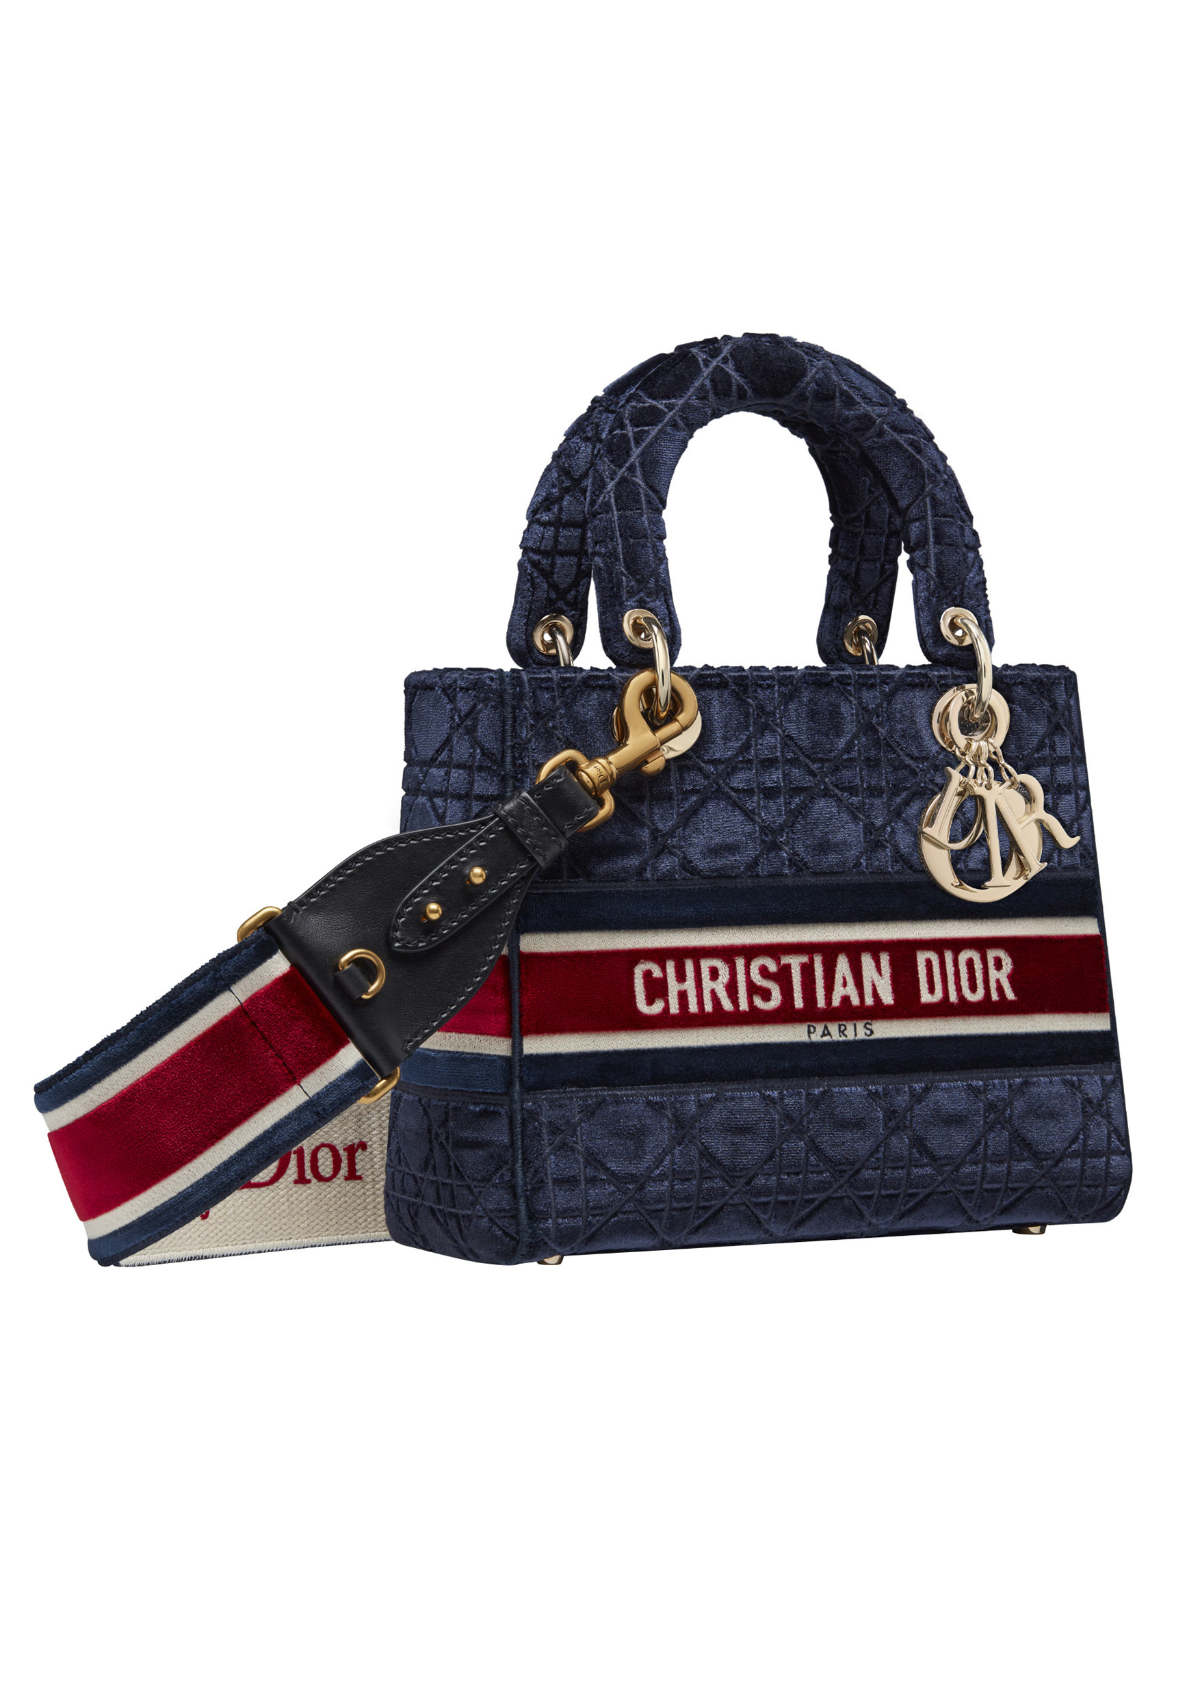 NEW Dior Book Tote: Blue Velvet Crocodile Embroidered, Large, 2021